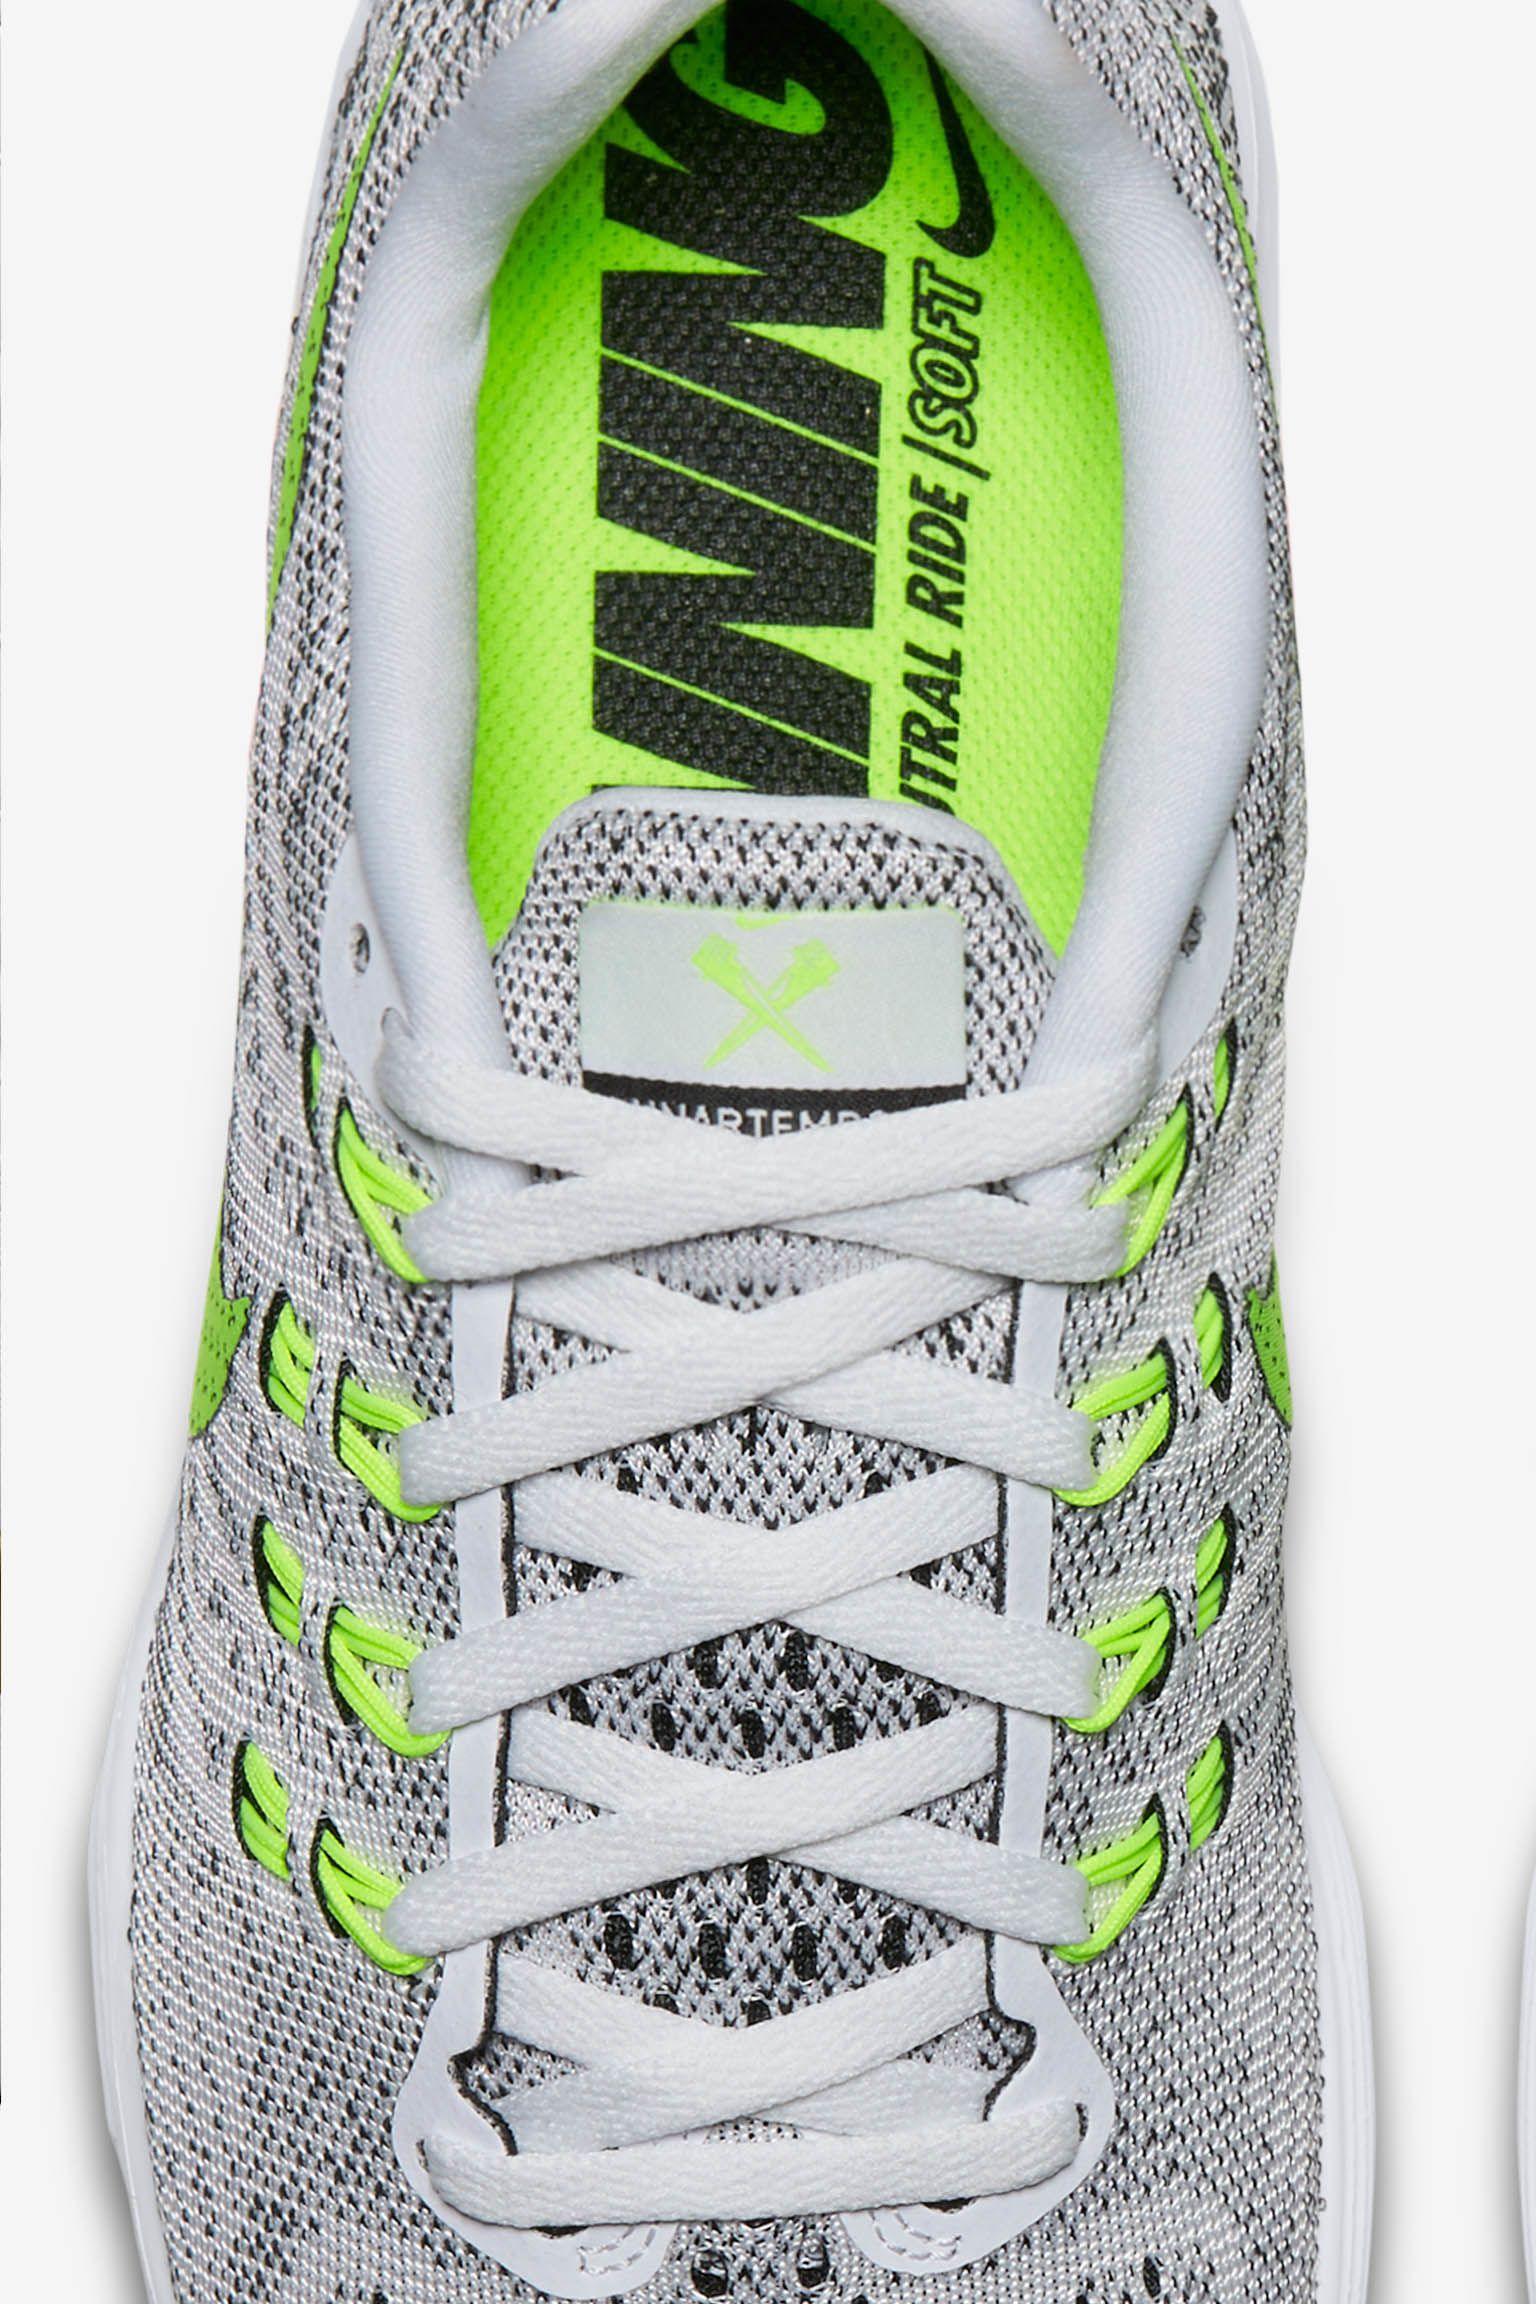 does nike store have lunartempo 2